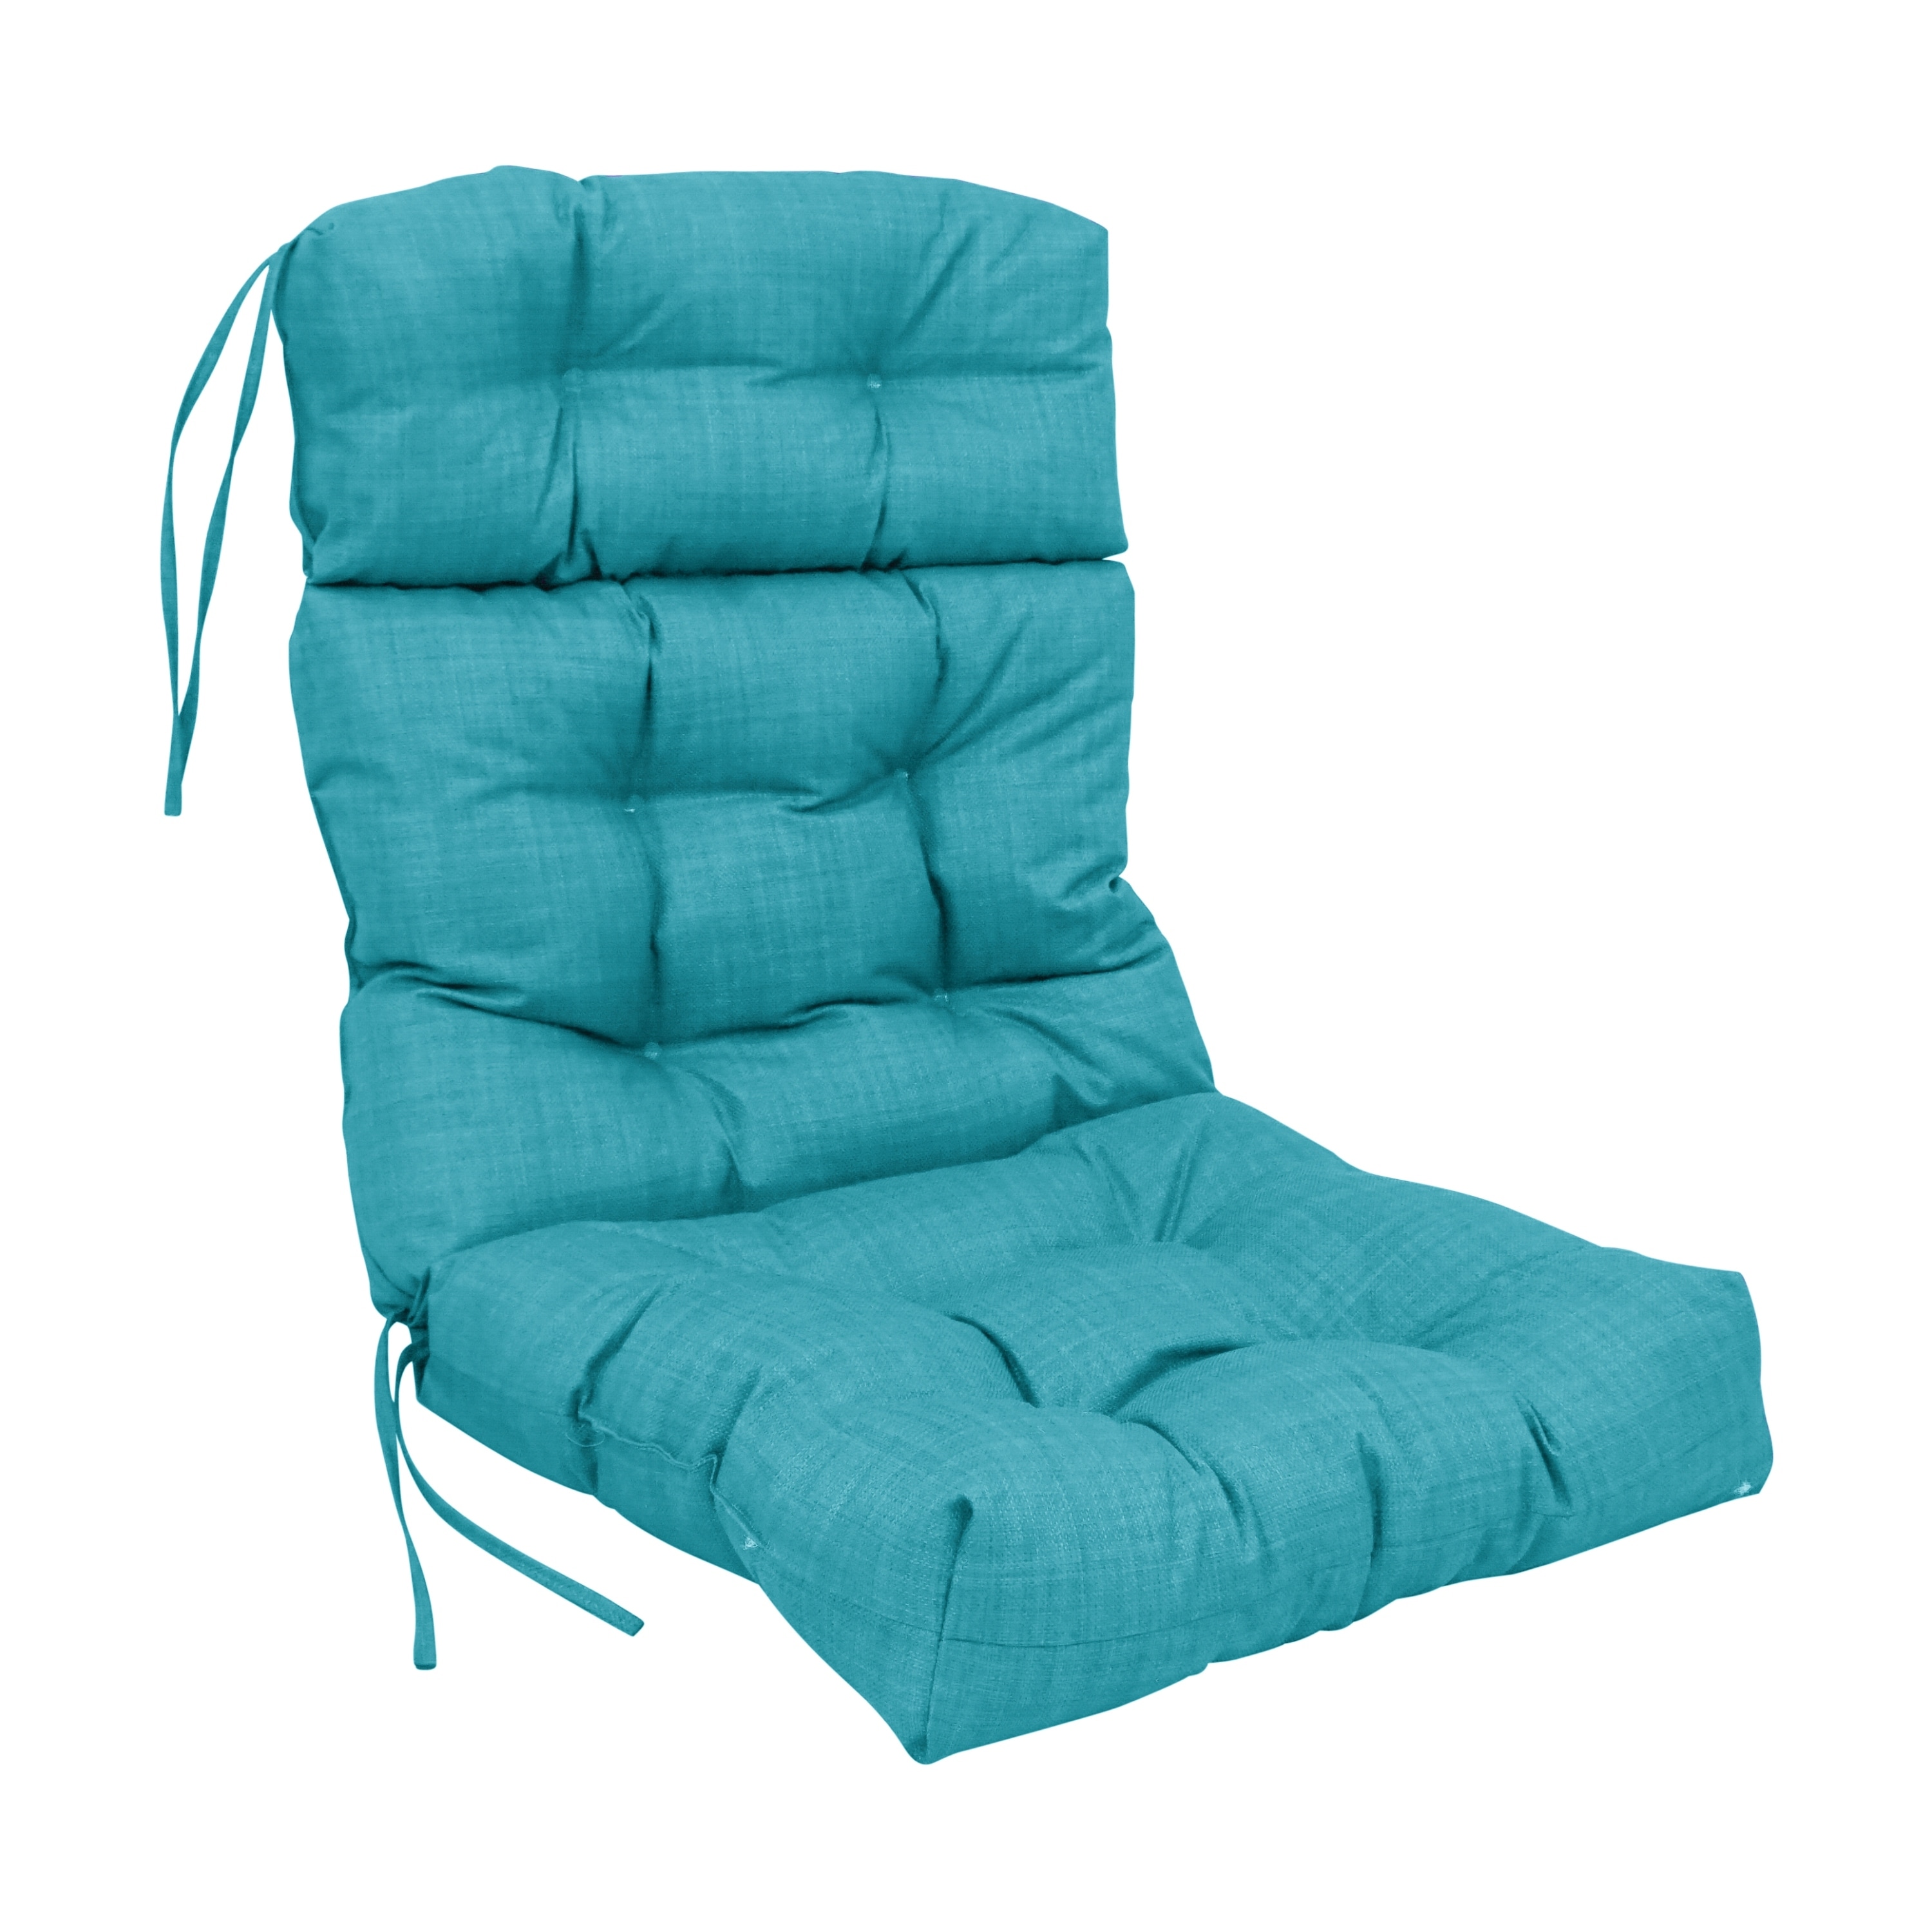 https://ak1.ostkcdn.com/images/products/is/images/direct/bc244b060c250e5c2b59cdc99a6a022334e0a102/Three-section-Tufted-Outdoor-Seat-Back-Chair-Cushion-%28Multiple-Sizes%29.jpg